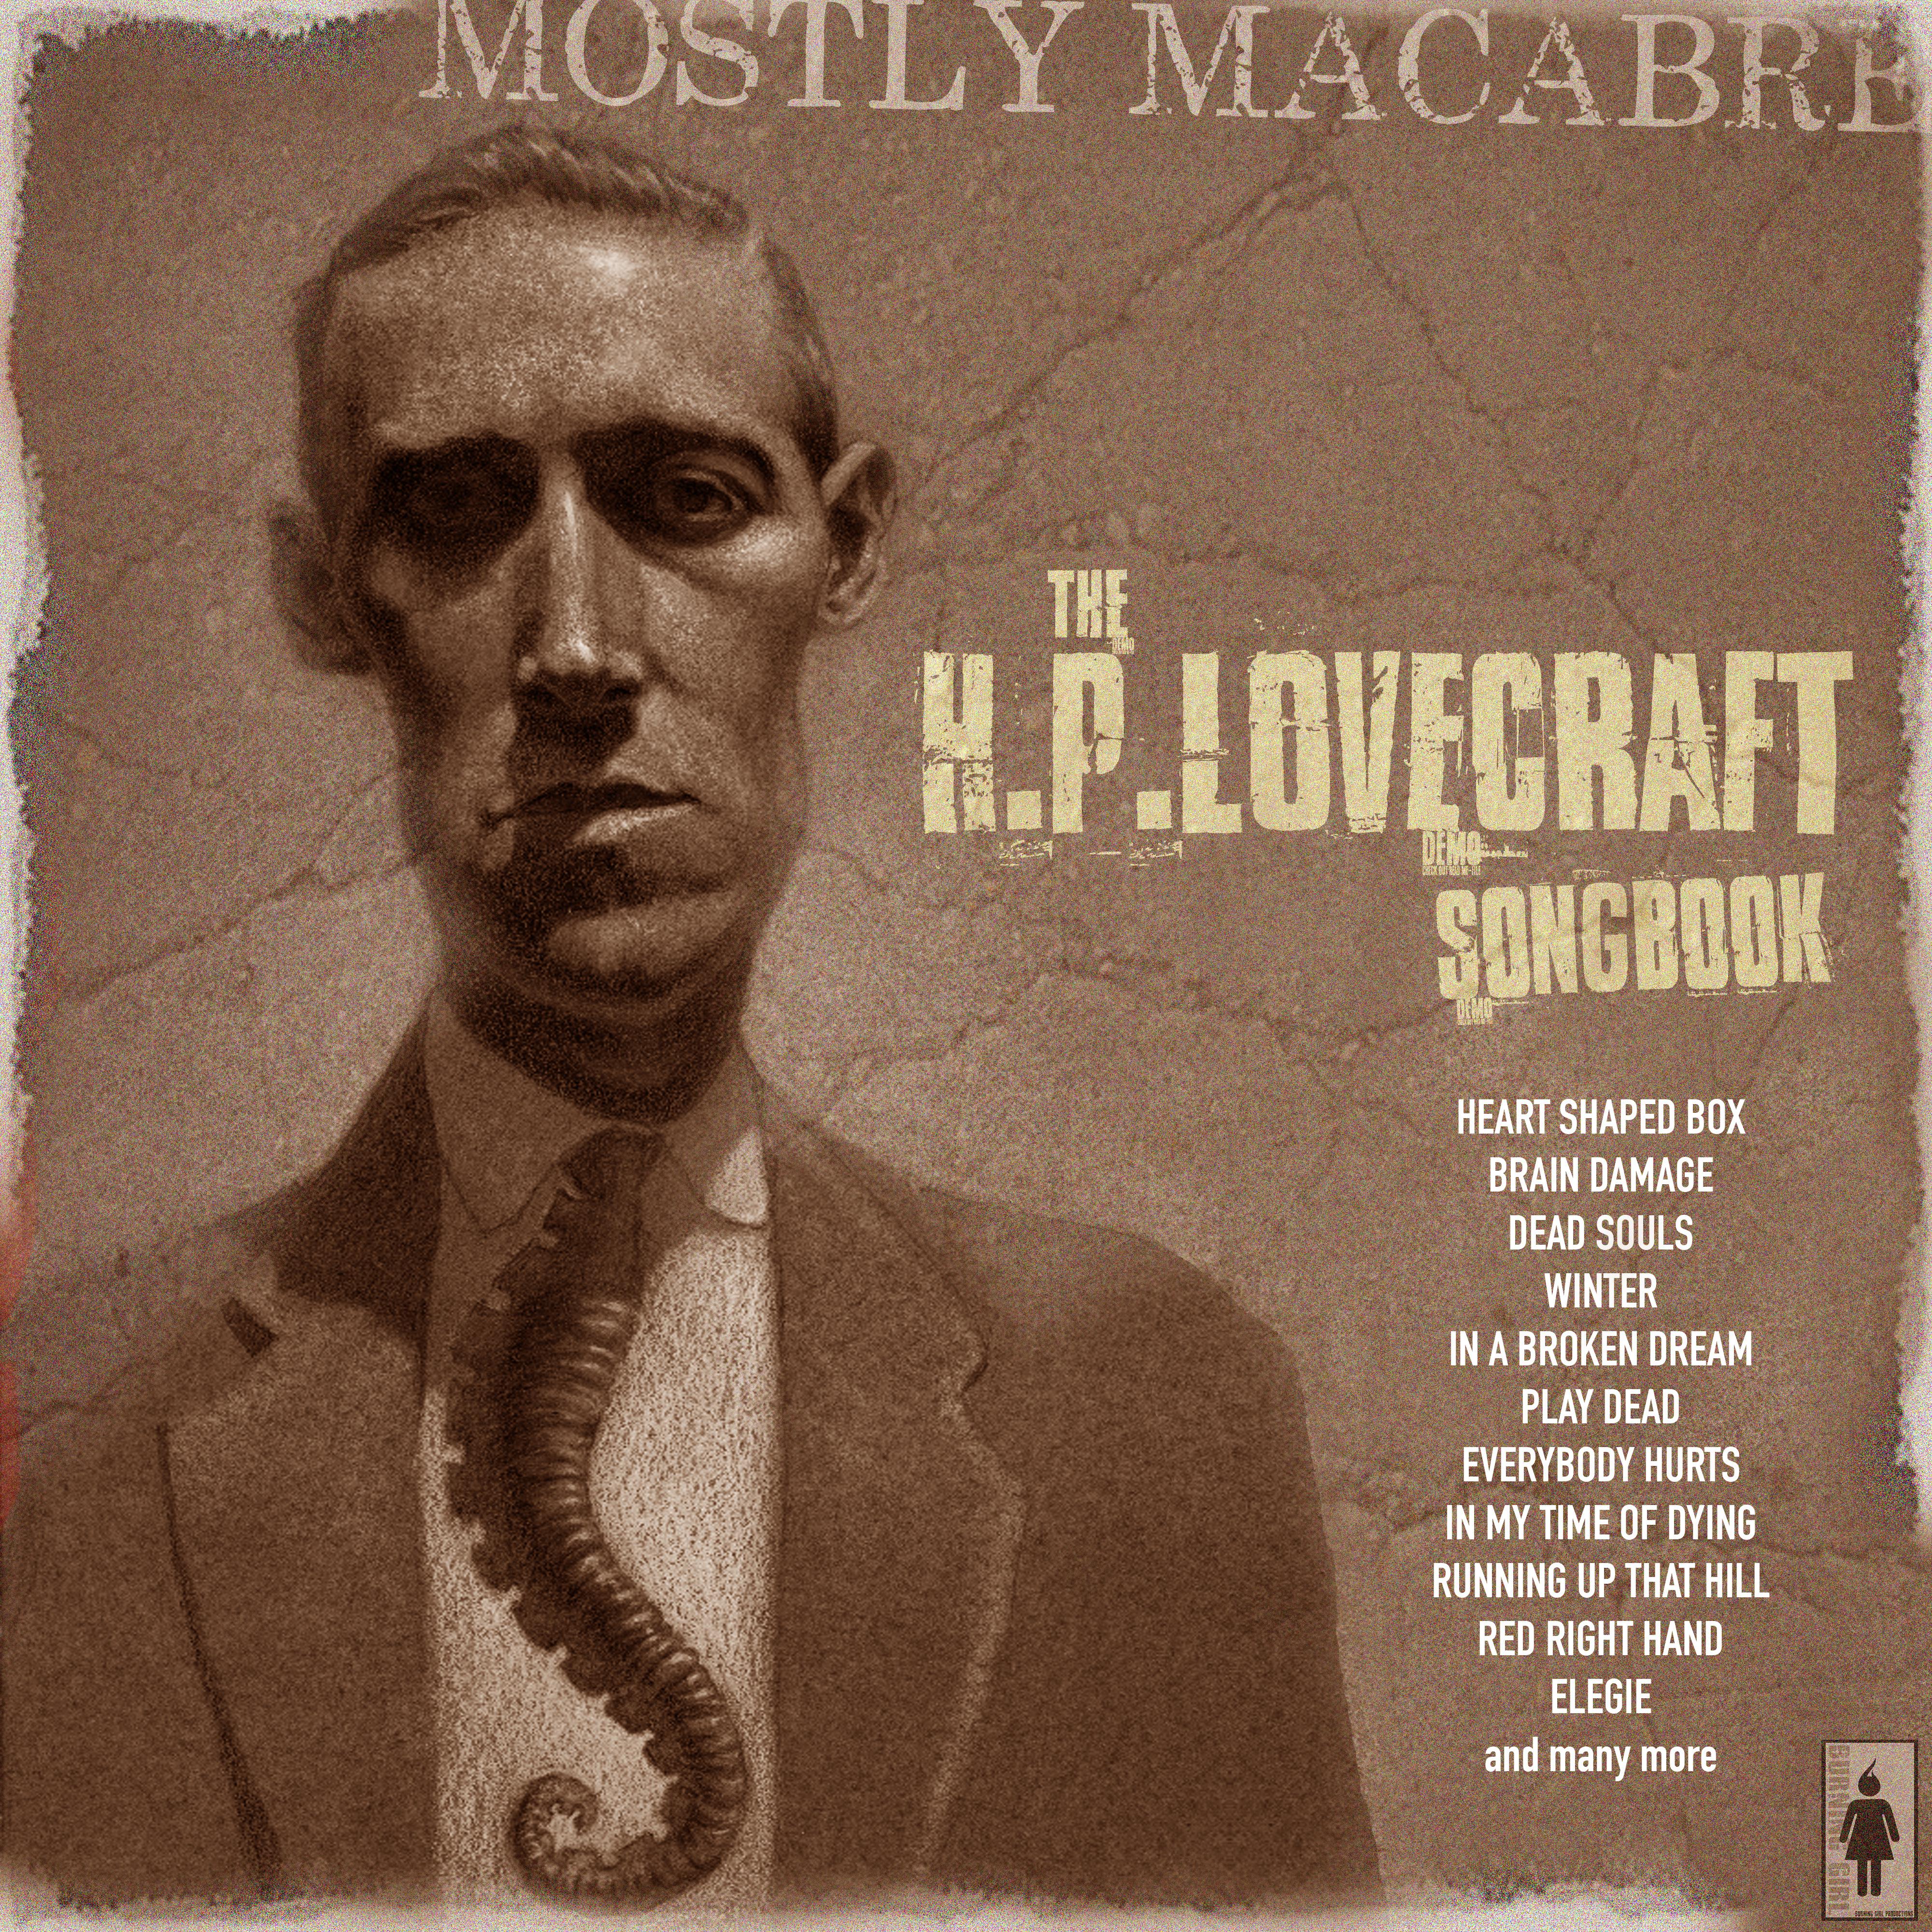 Mostly Macabre-The H.P.Lovecraft Songbook